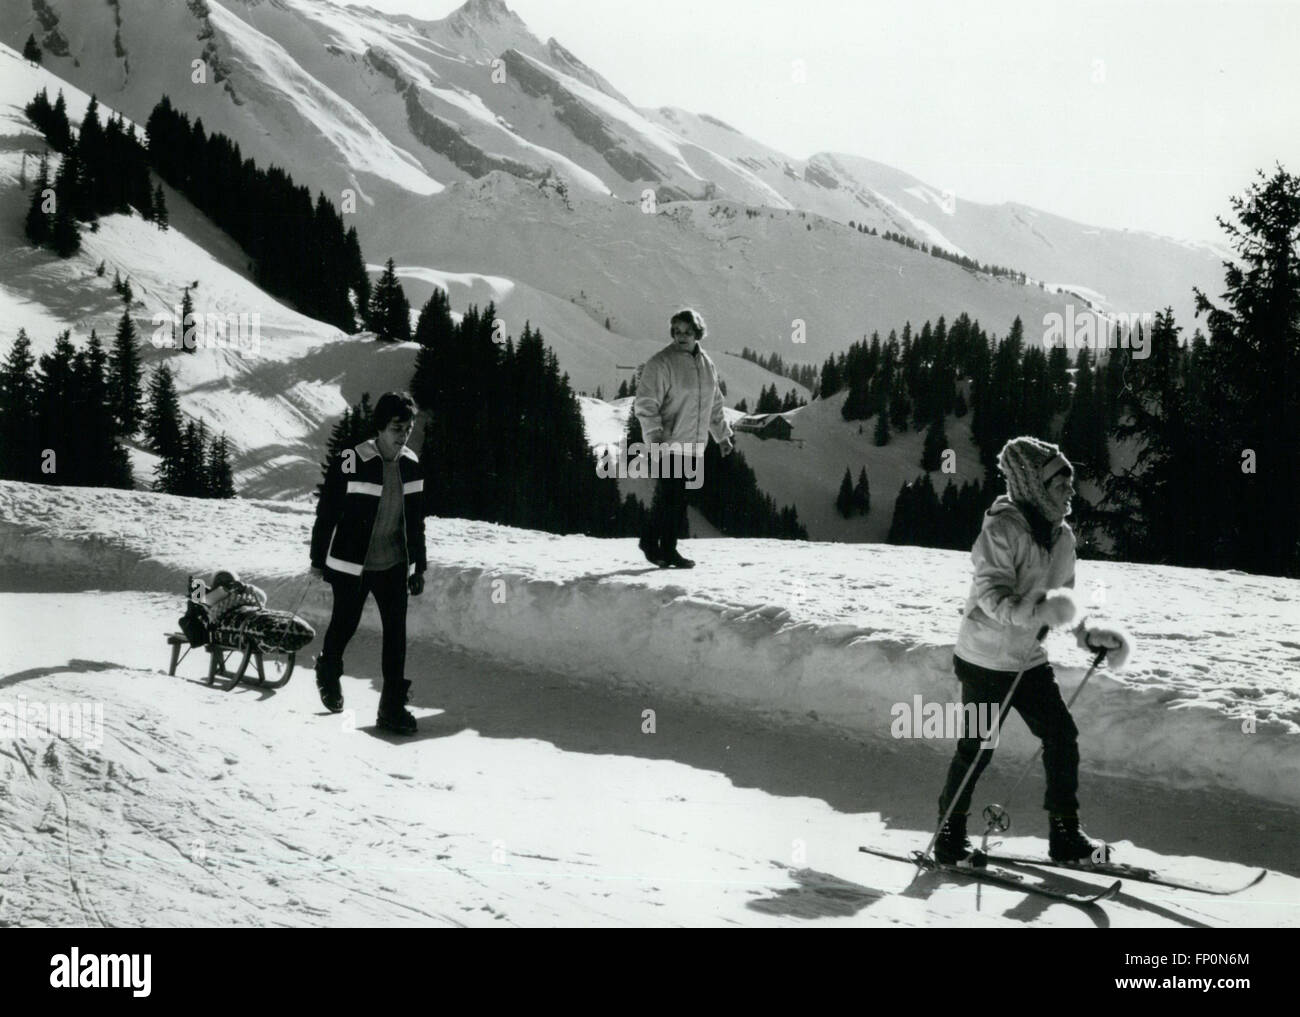 1962 - Portable Baby Sitter: In Switzerland hikes can take their babies along when they walk on the neatly kept winter trails.The sled can be rented. The young skier is on her way to a beginner's slope at Klewenalp in Central Switzerland. © Keystone Pictures USA/ZUMAPRESS.com/Alamy Live News Stock Photo